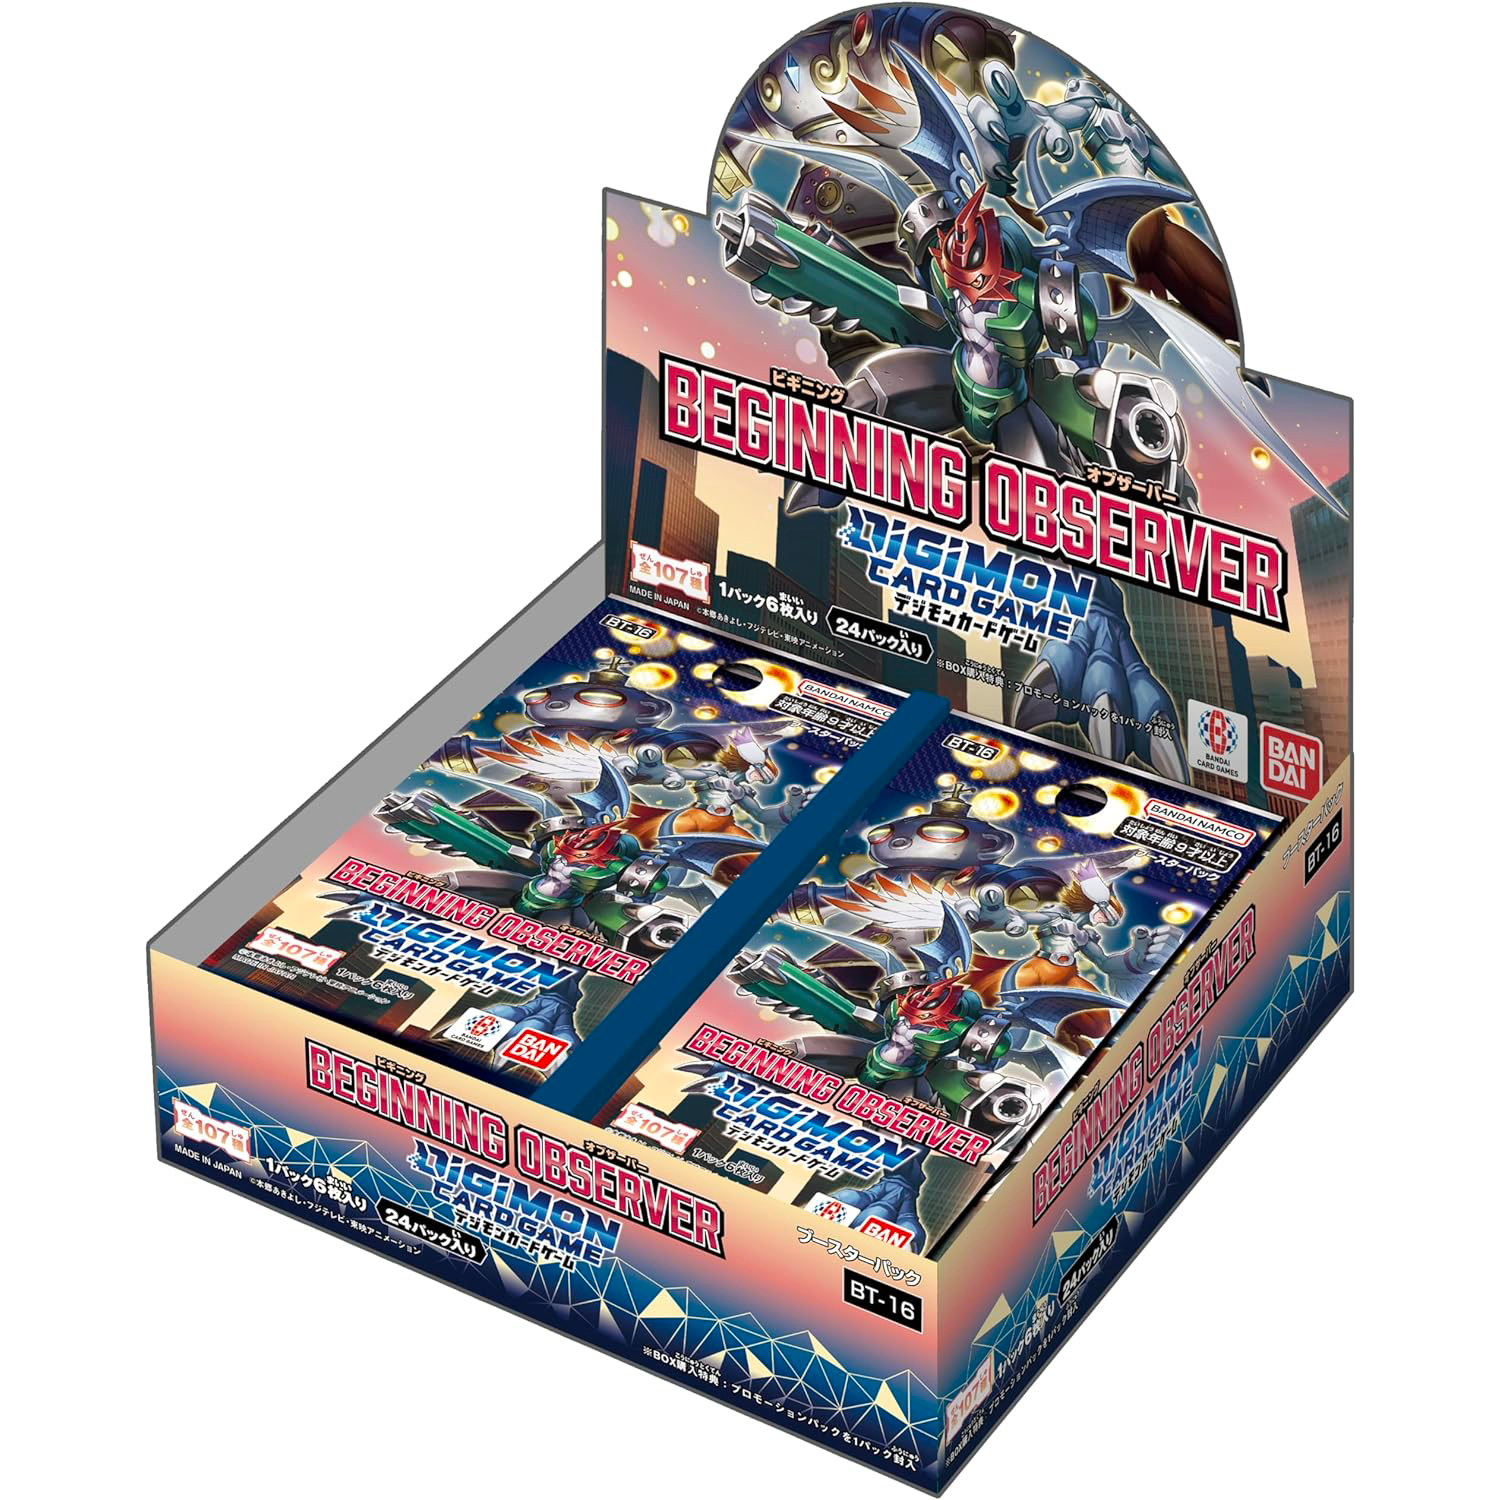 DIGIMON CARD GAME - Boxes / Booster Packs / Single cards